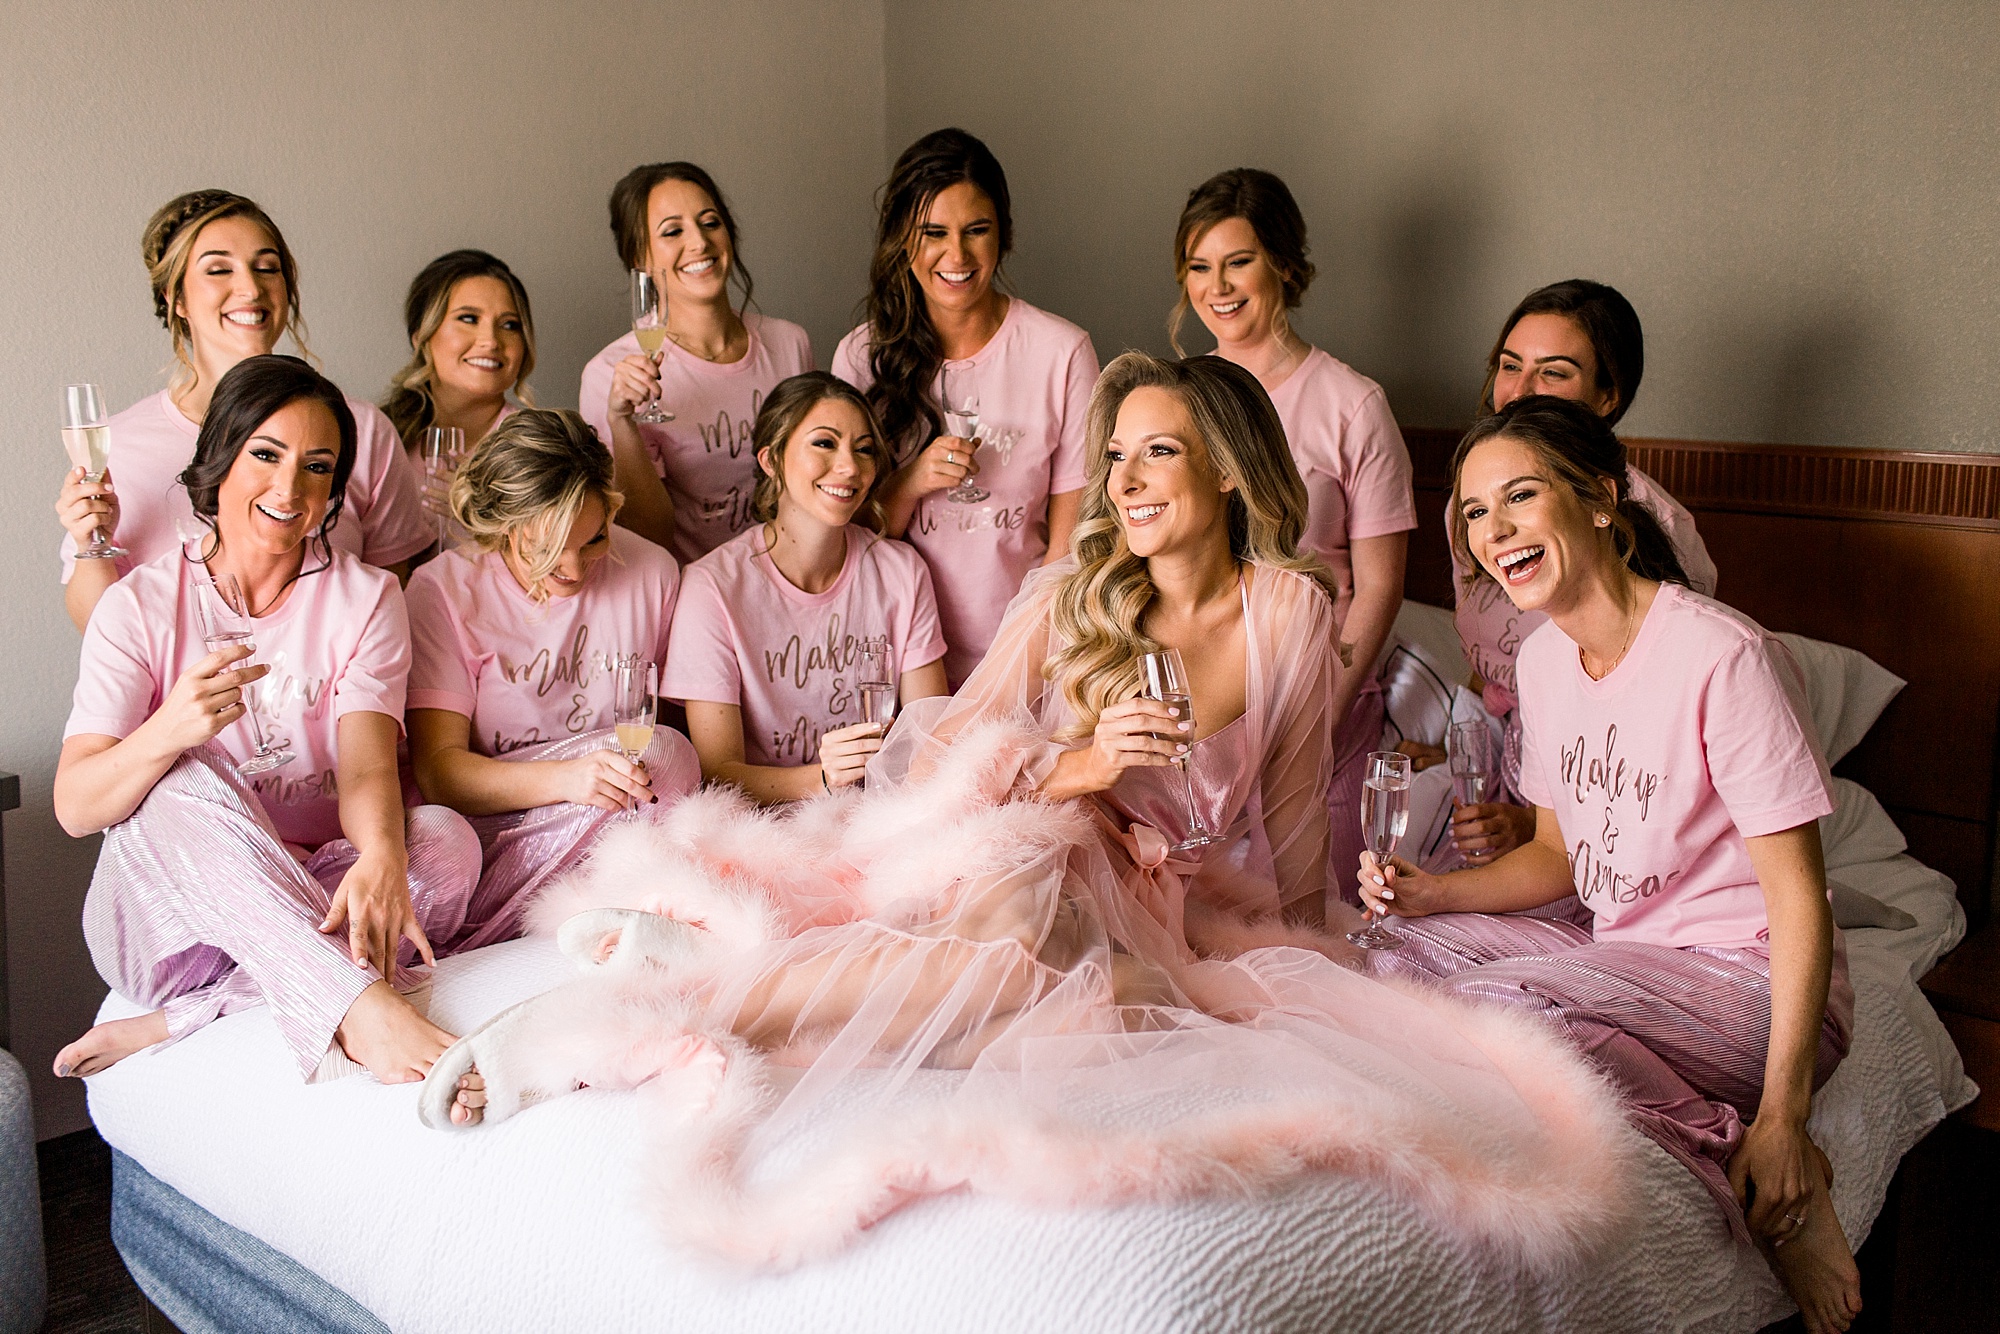 bride in fluffy pink robe sits with bridesmaids in custom pajamas on bed